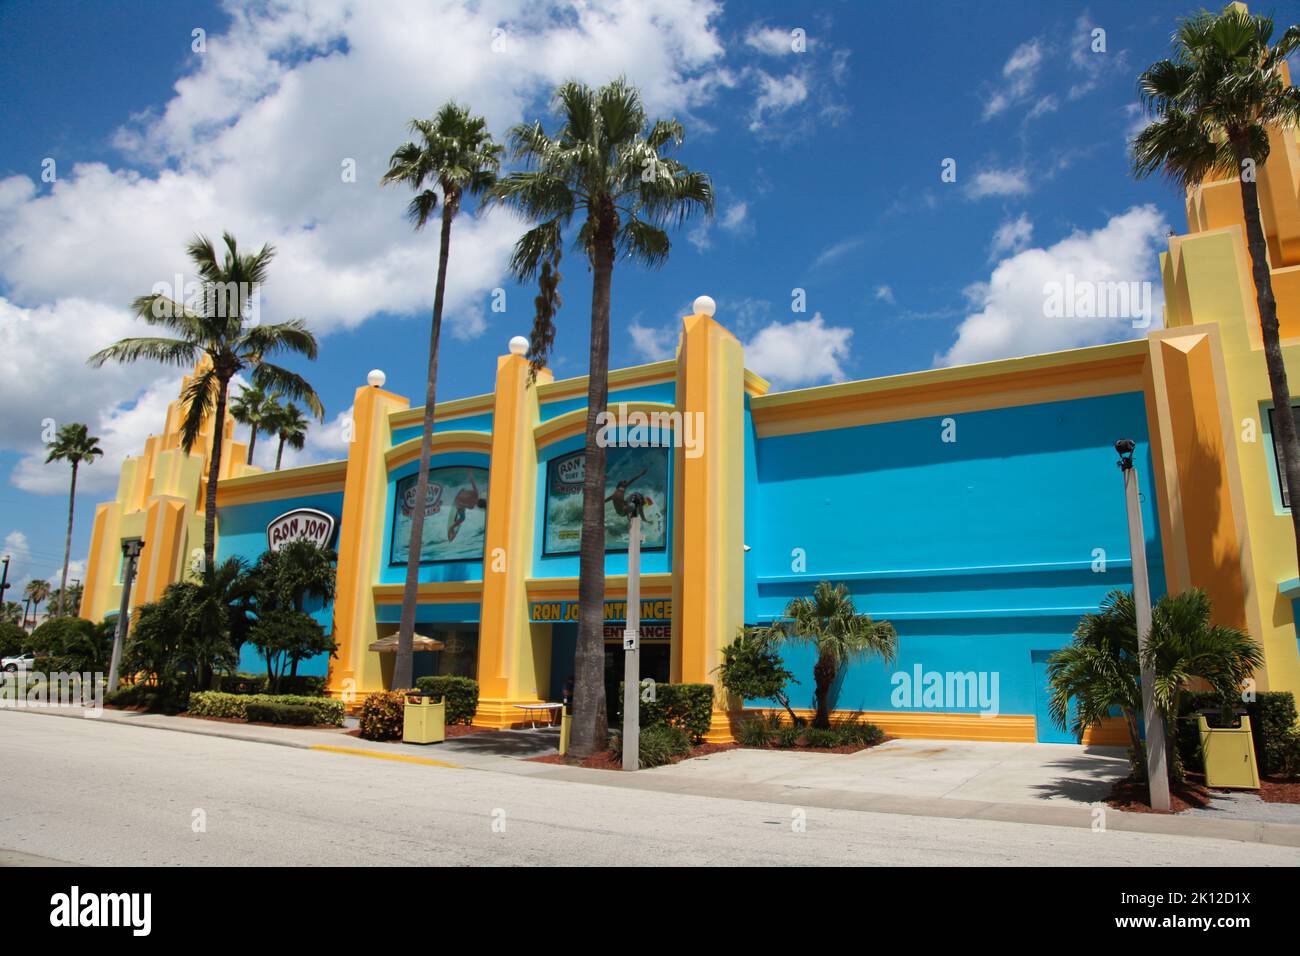 Ron Jon Surf Shop in Cocoa Beach, Florida, USA. Ron Jon Surf Shop is a surfer style retail store chain founded in 1959. Stock Photo